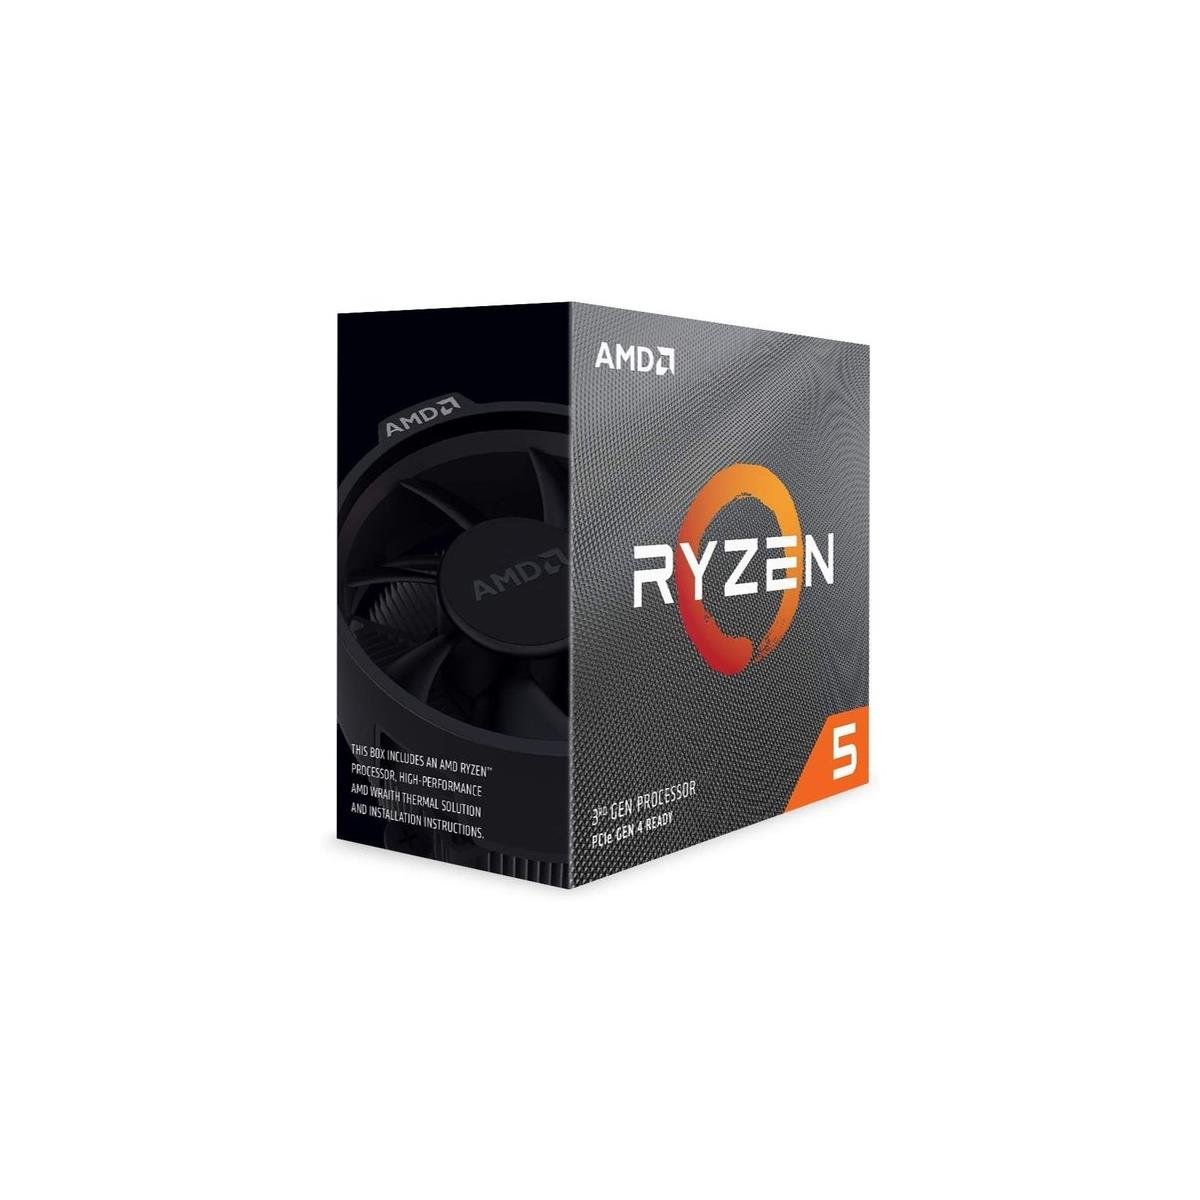 AMD Ryzen 5 3600 CPU And ASUS Prime X570-P Motherboard Combo Deal